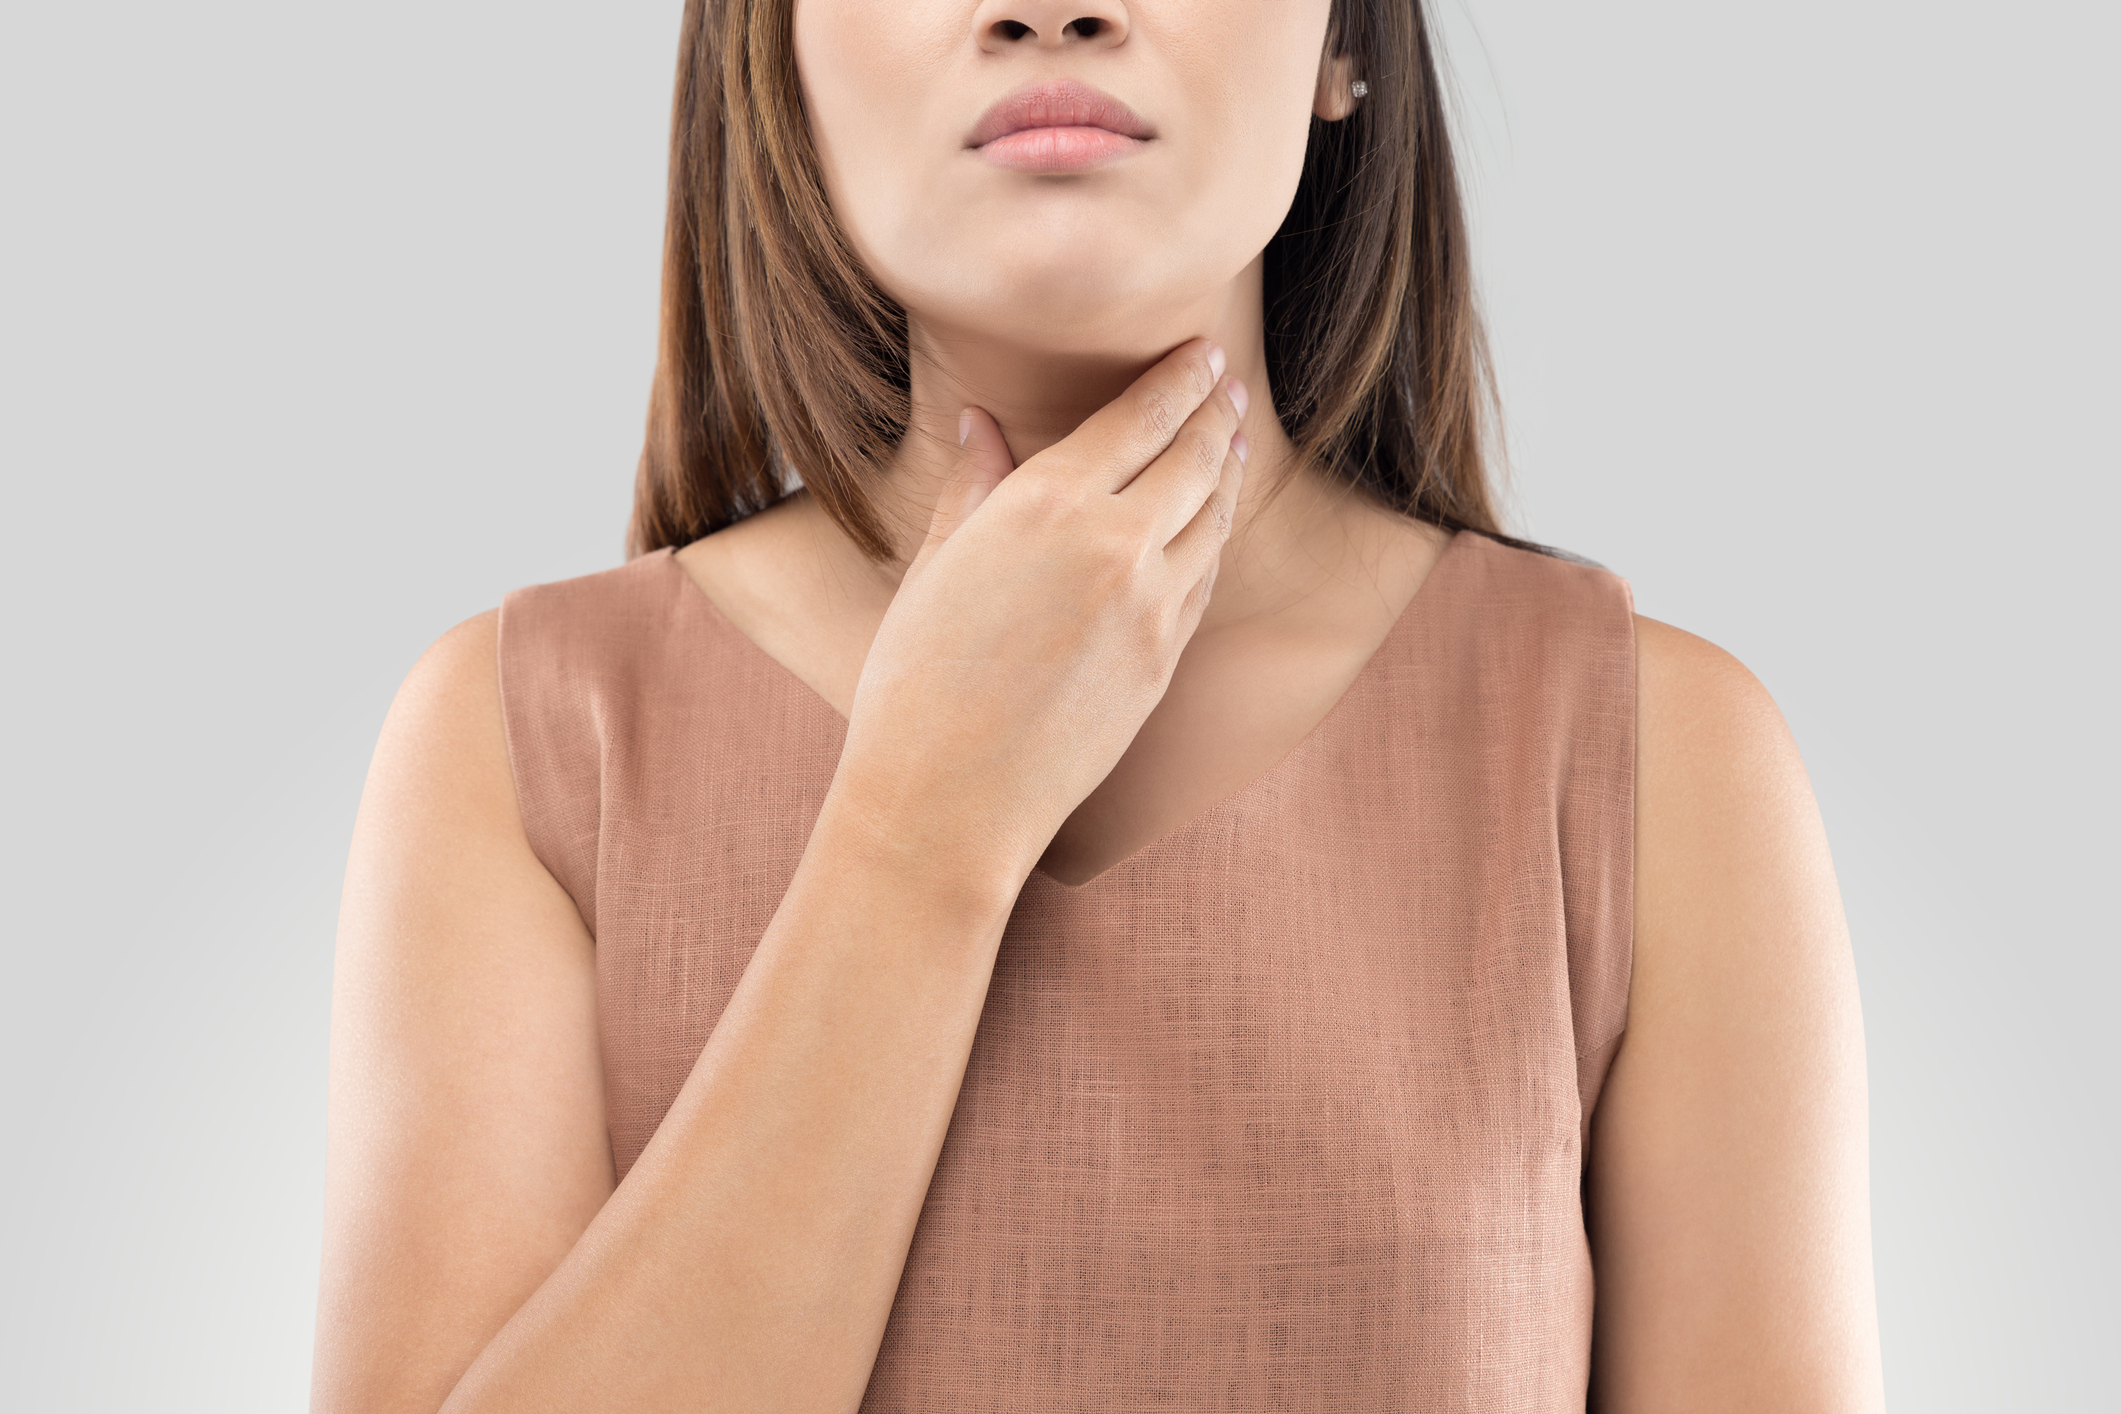 An image of a young woman with a sore throat touching her neck. 